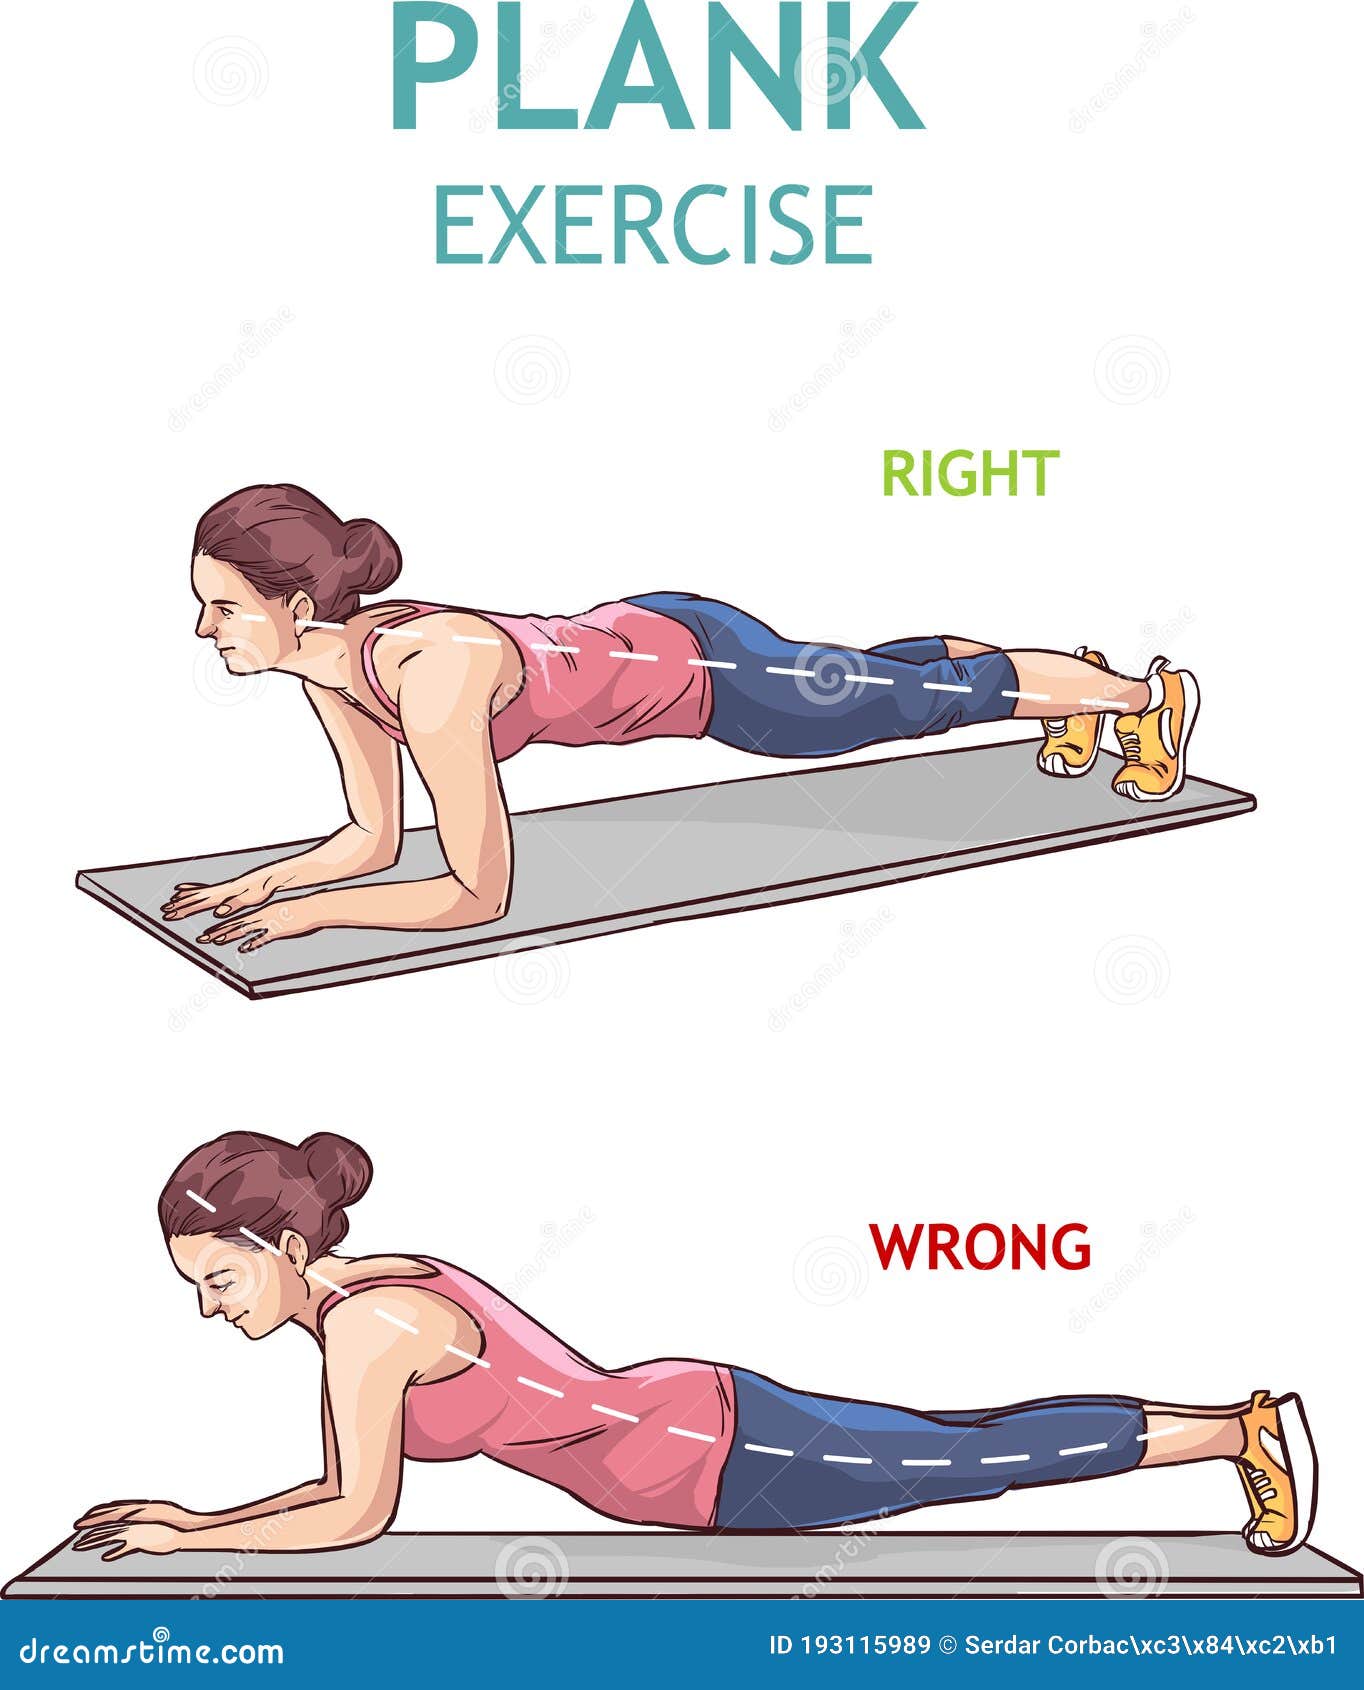 Benefits Of Doing The Plank Exercise Every Day - PharmEasy Blog